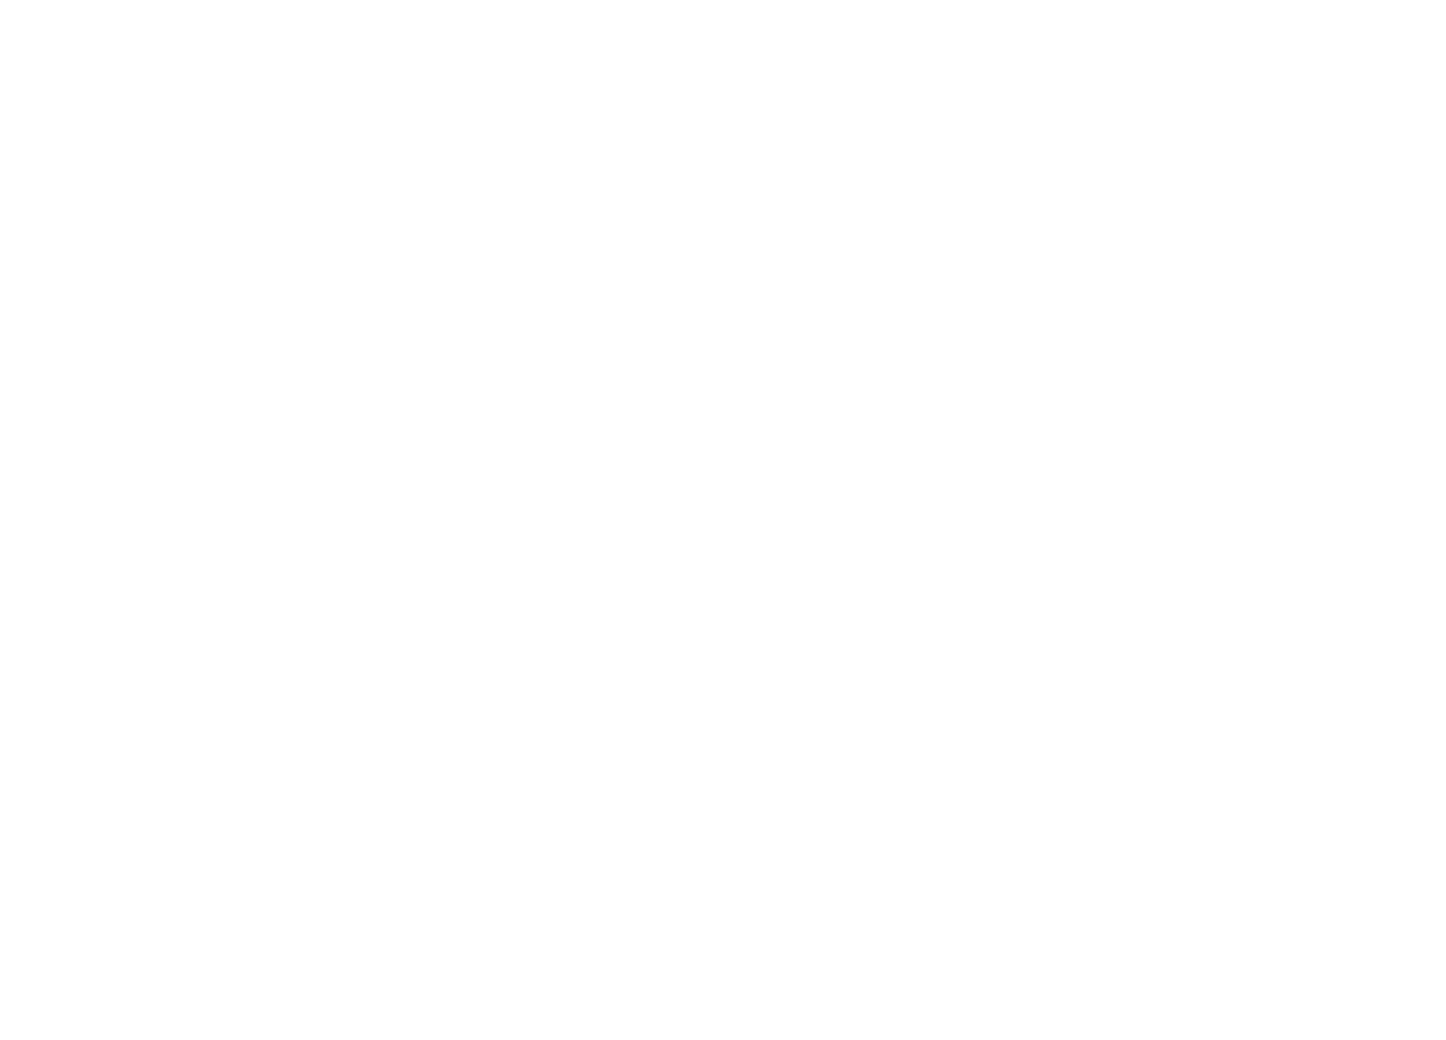 Mollie payments